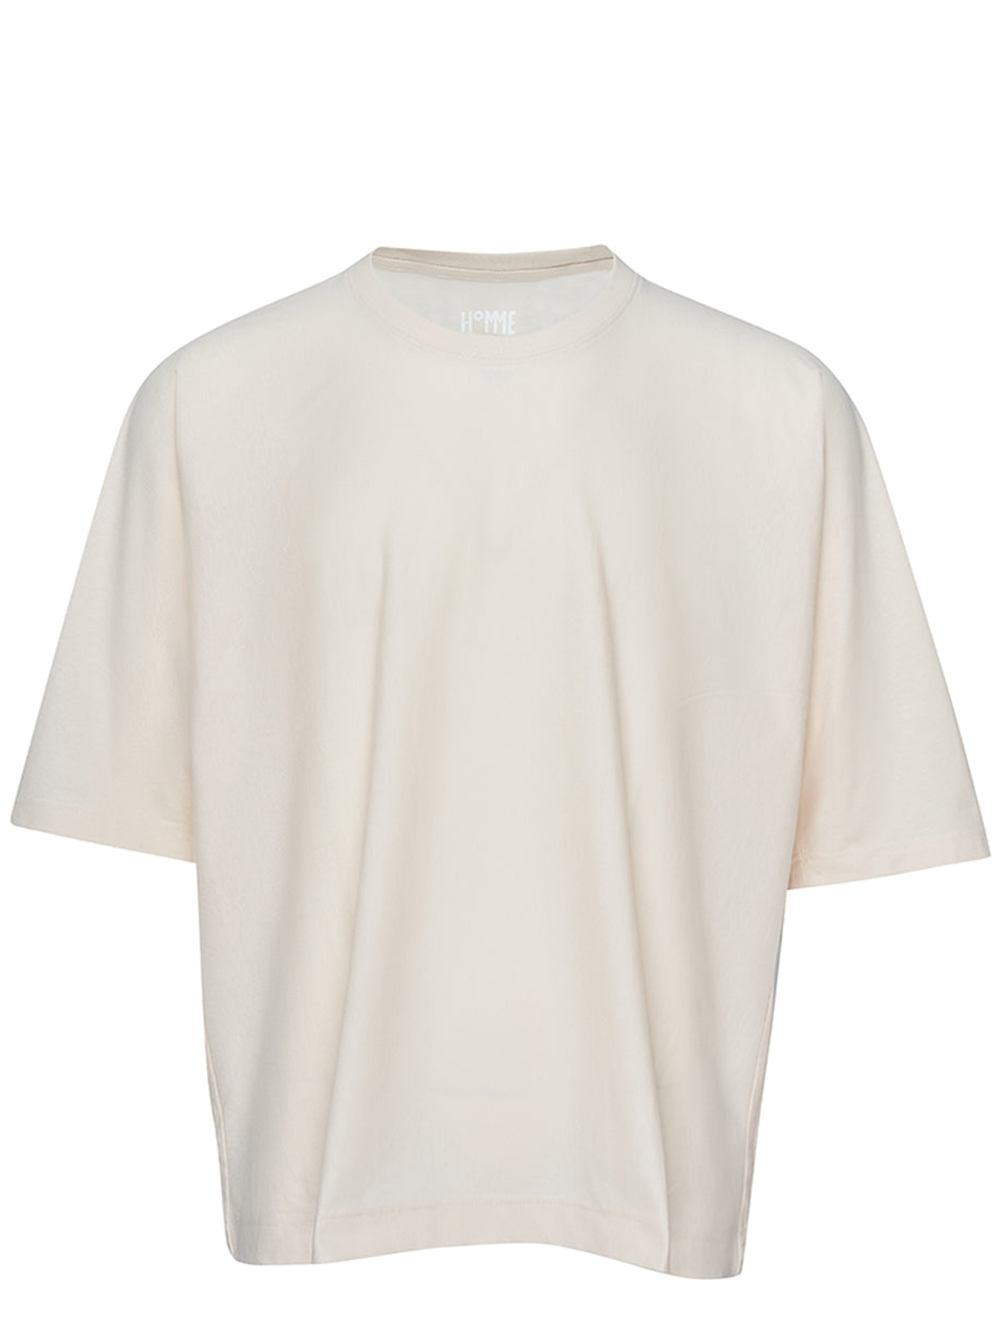 HOMME PLISSE ISSEY MIYAKE Release-T 2 T-Shirt Ivory 1